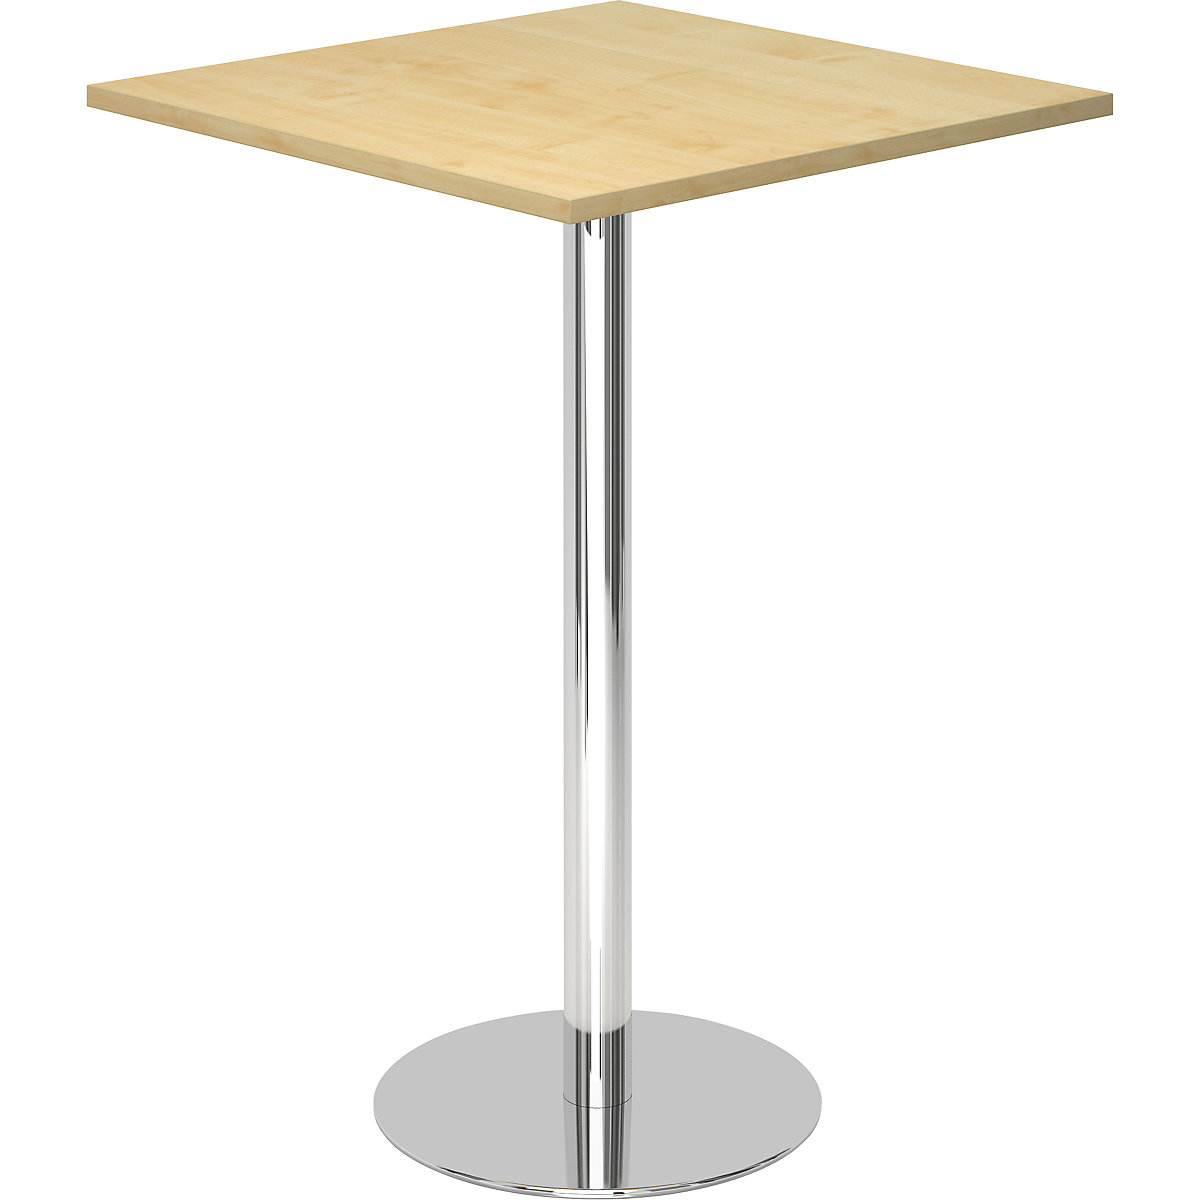 Pedestal table, LxW 800 x 800 mm